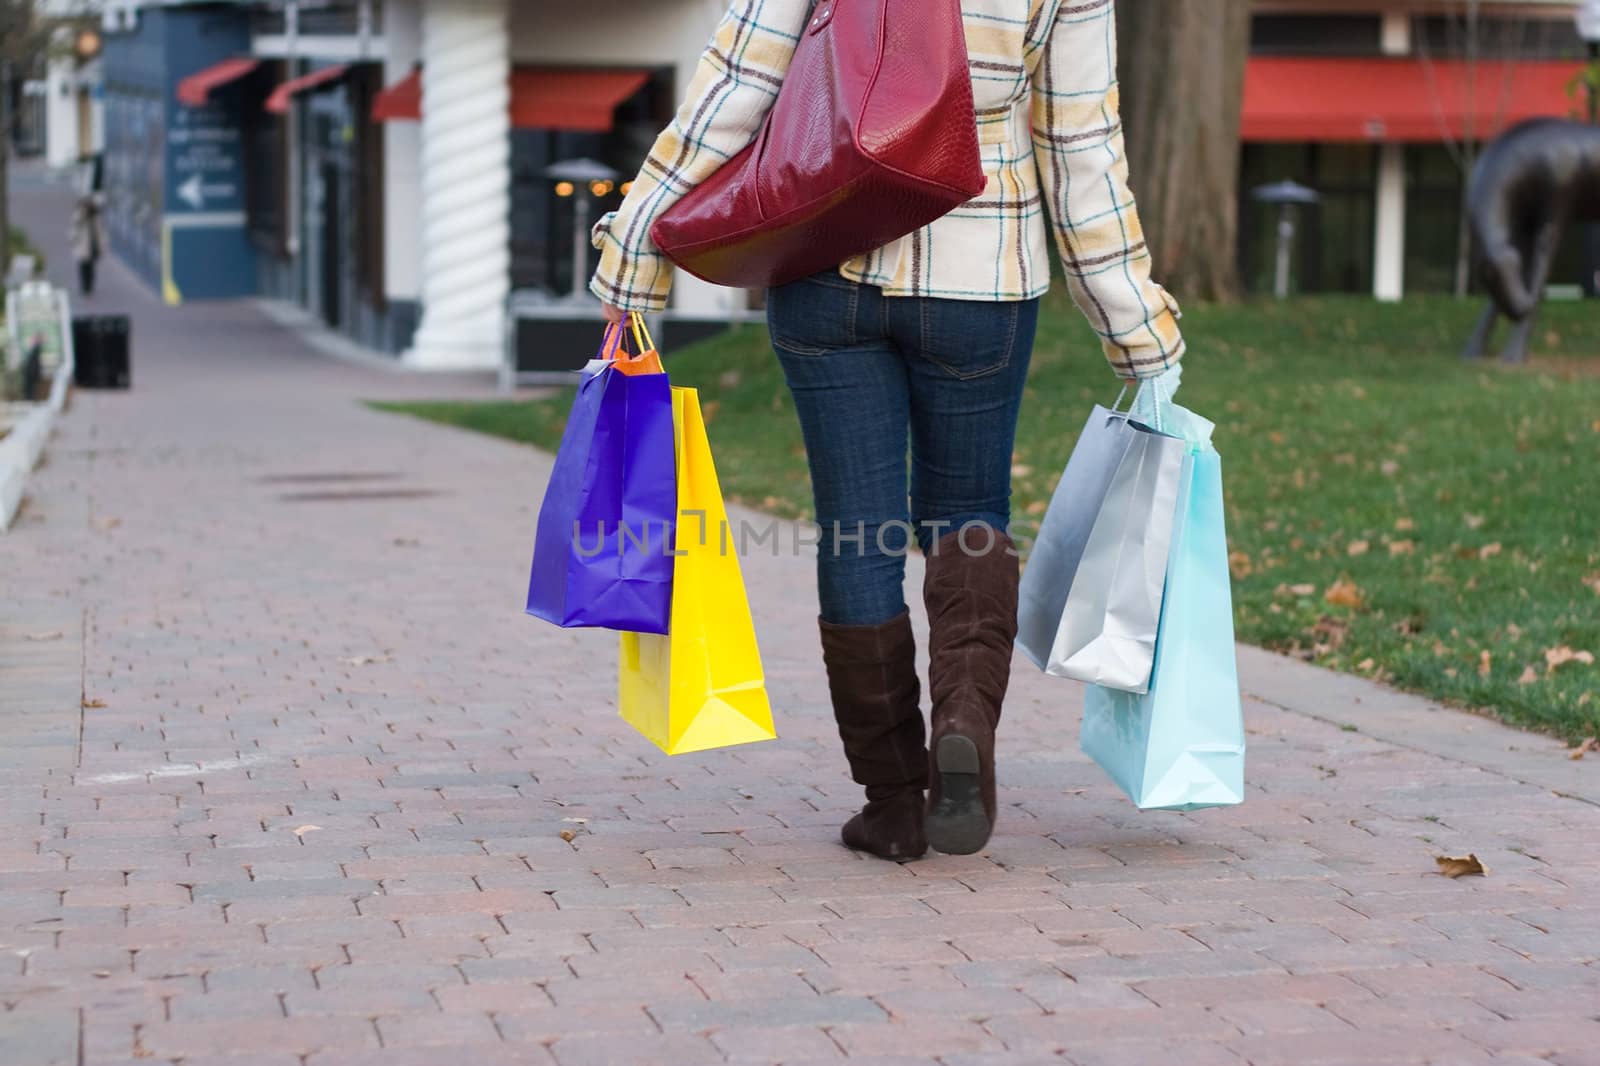 An attractive girl out shopping in the city.